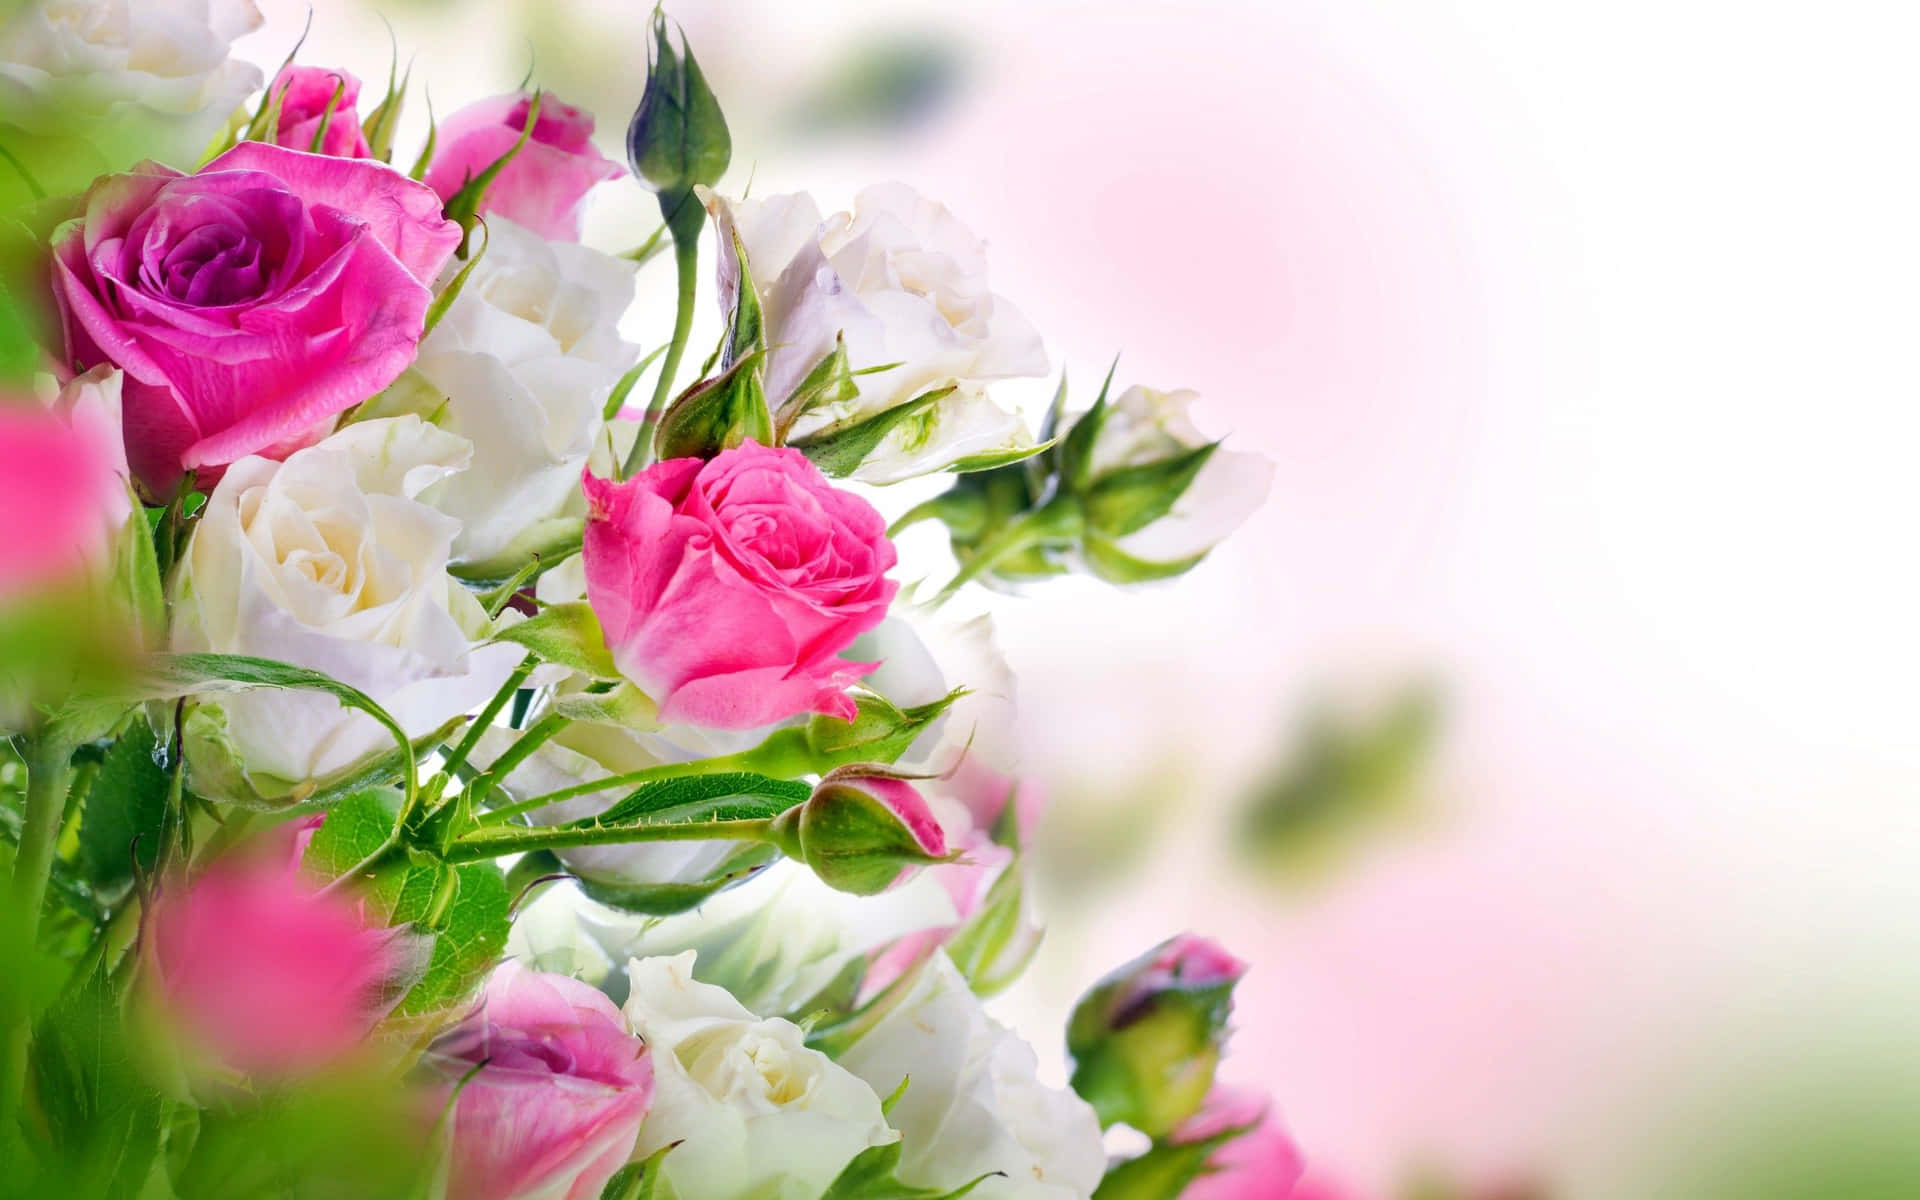 Pink And White Roses In A Vase